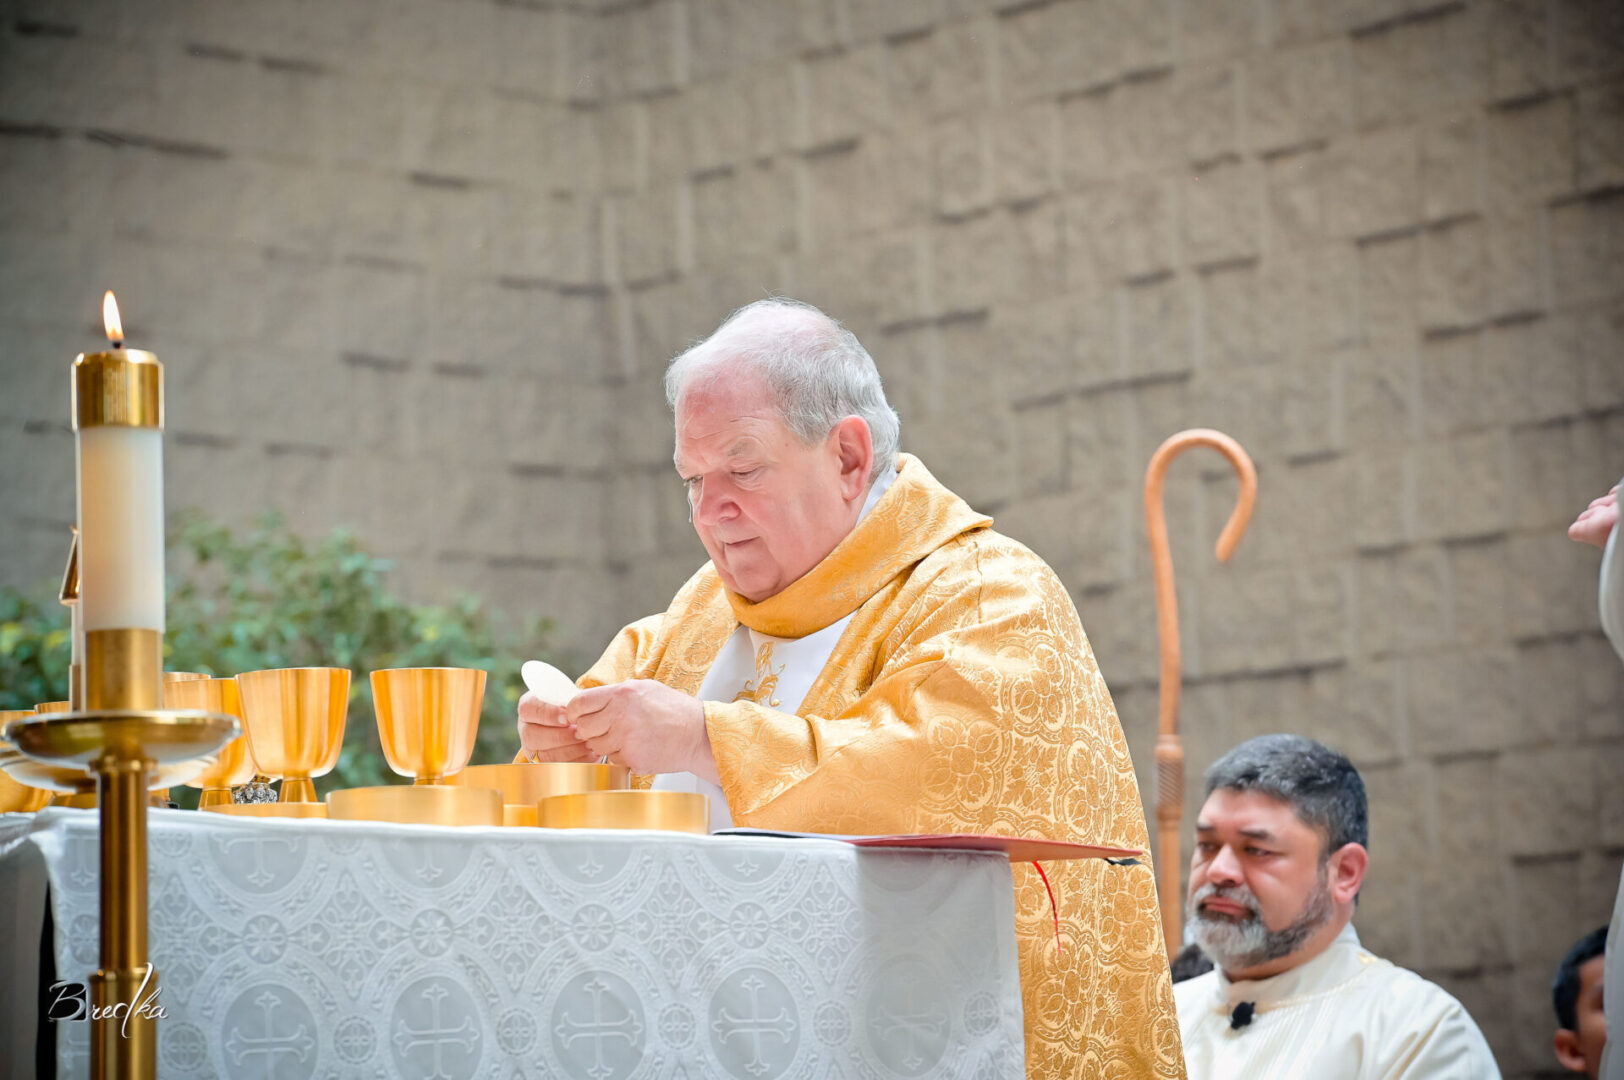 Priest holding communion wafer at altar.